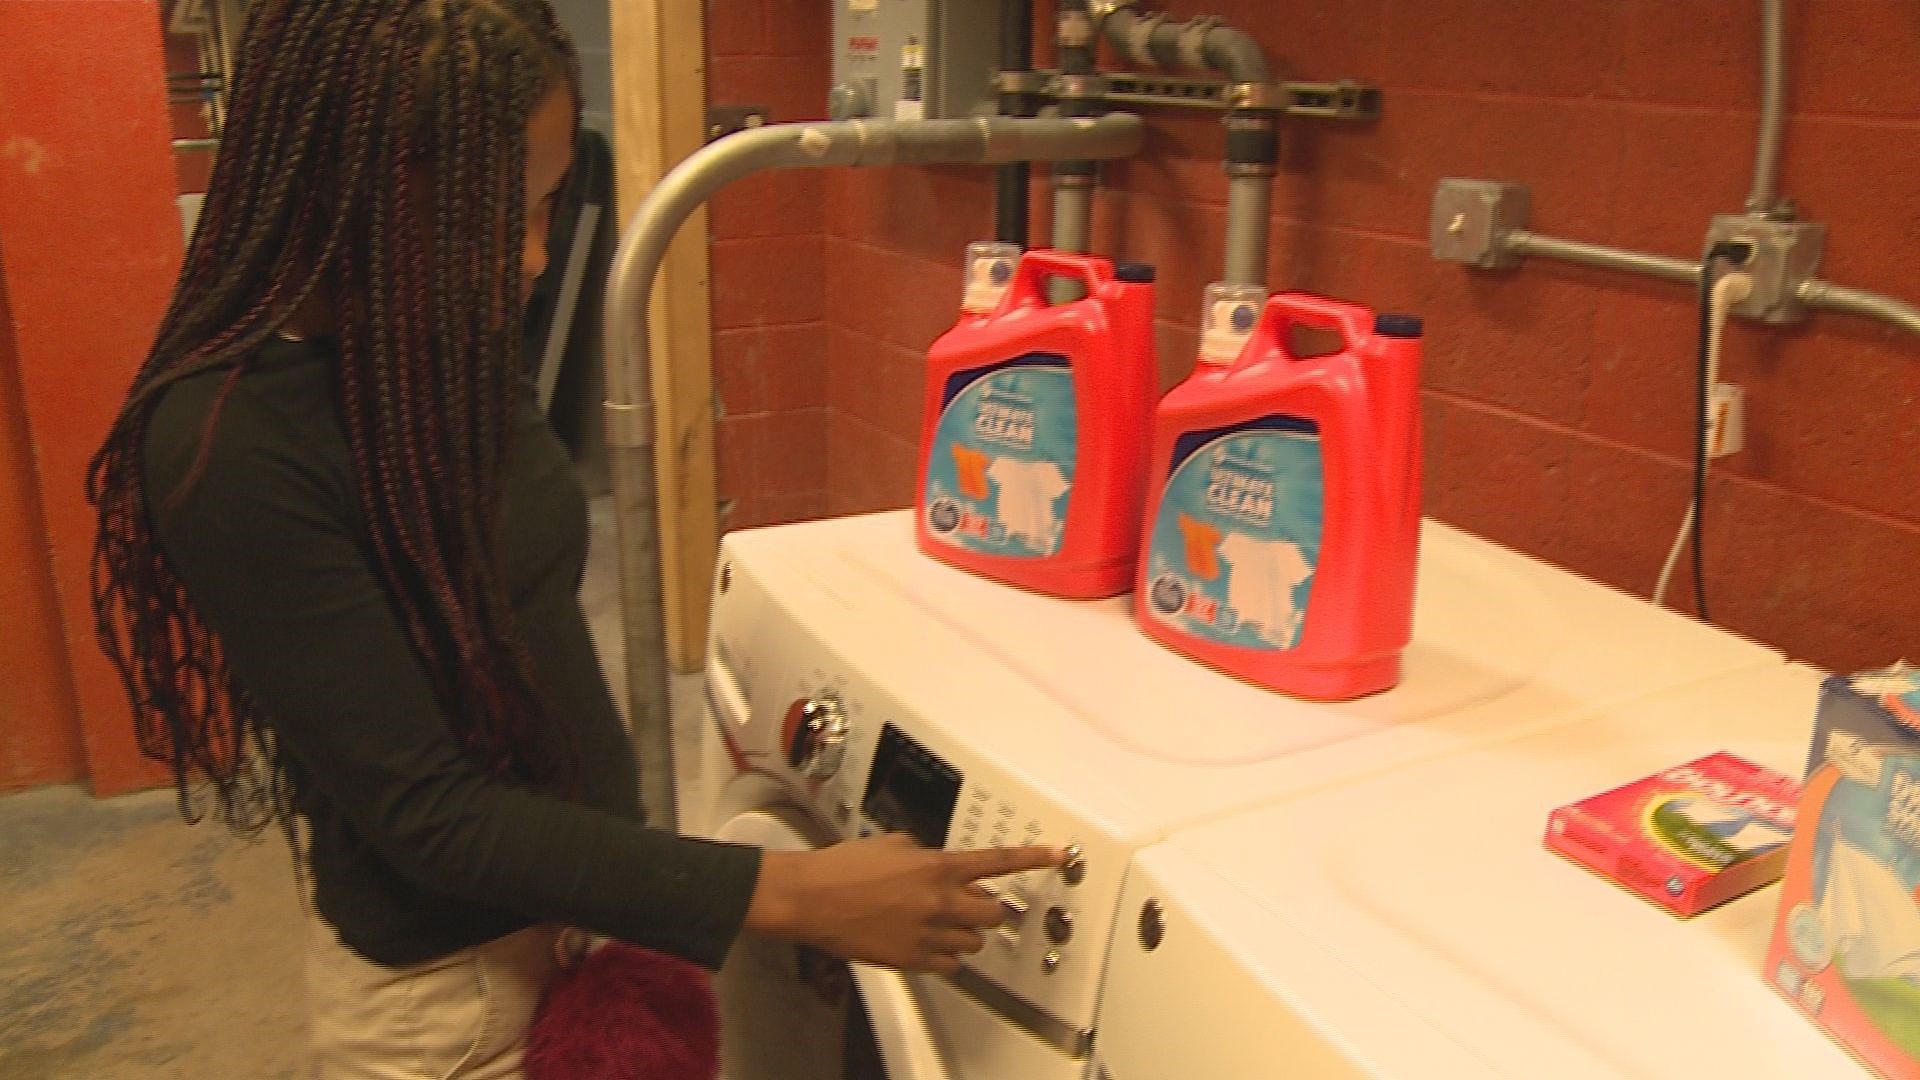 GE recently donated a brand new washer and dryer to Muskegon Heights High School after they learned how much the school spends on laundry fees for students.